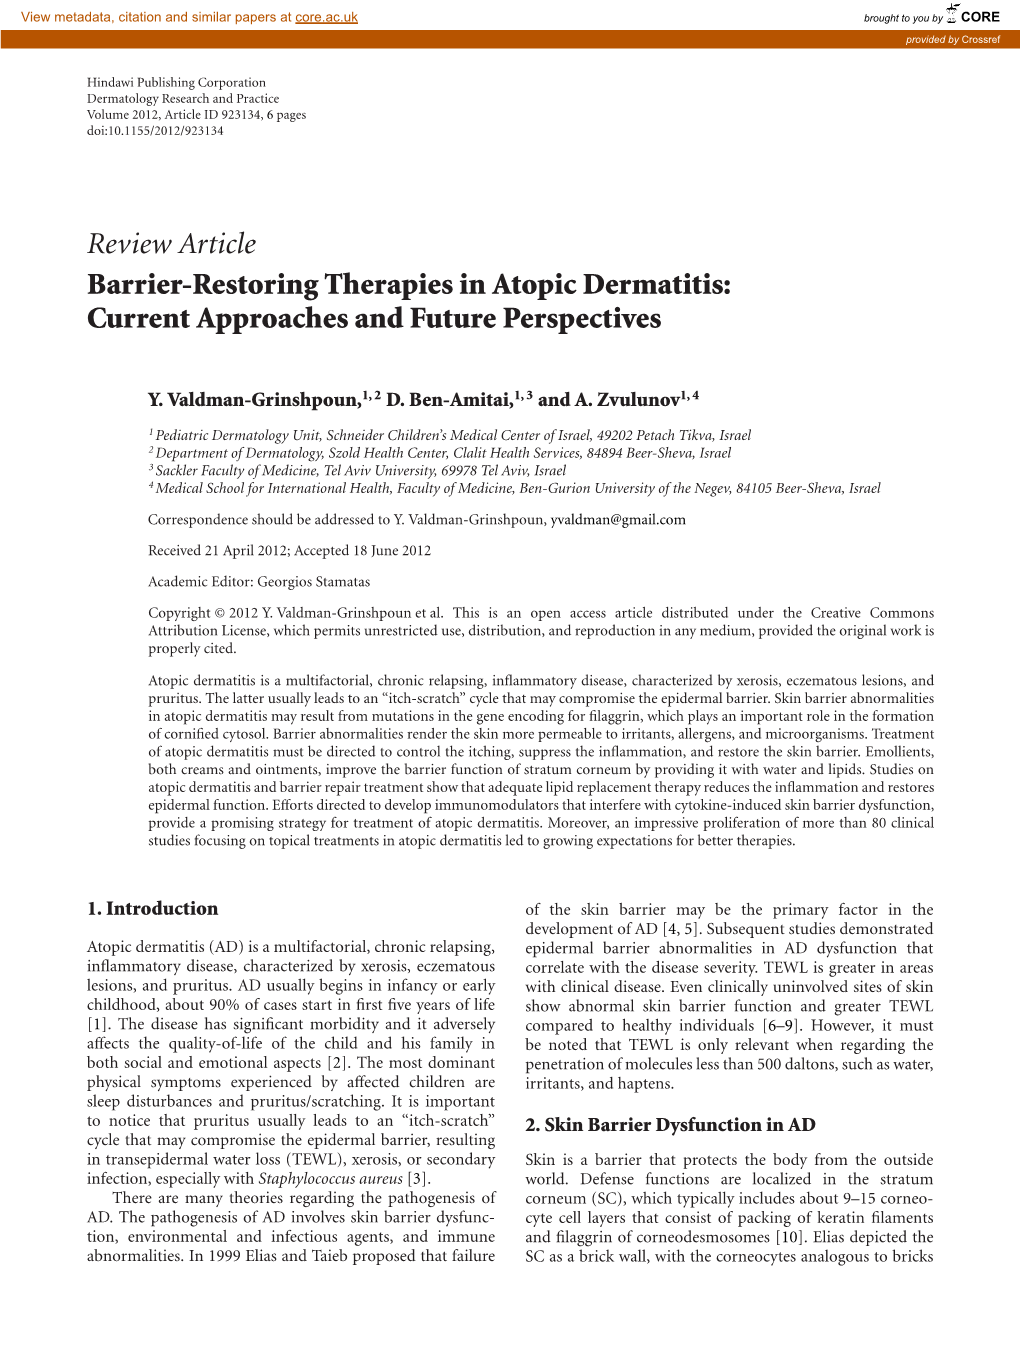 Review Article Barrier-Restoring Therapies in Atopic Dermatitis: Current Approaches and Future Perspectives